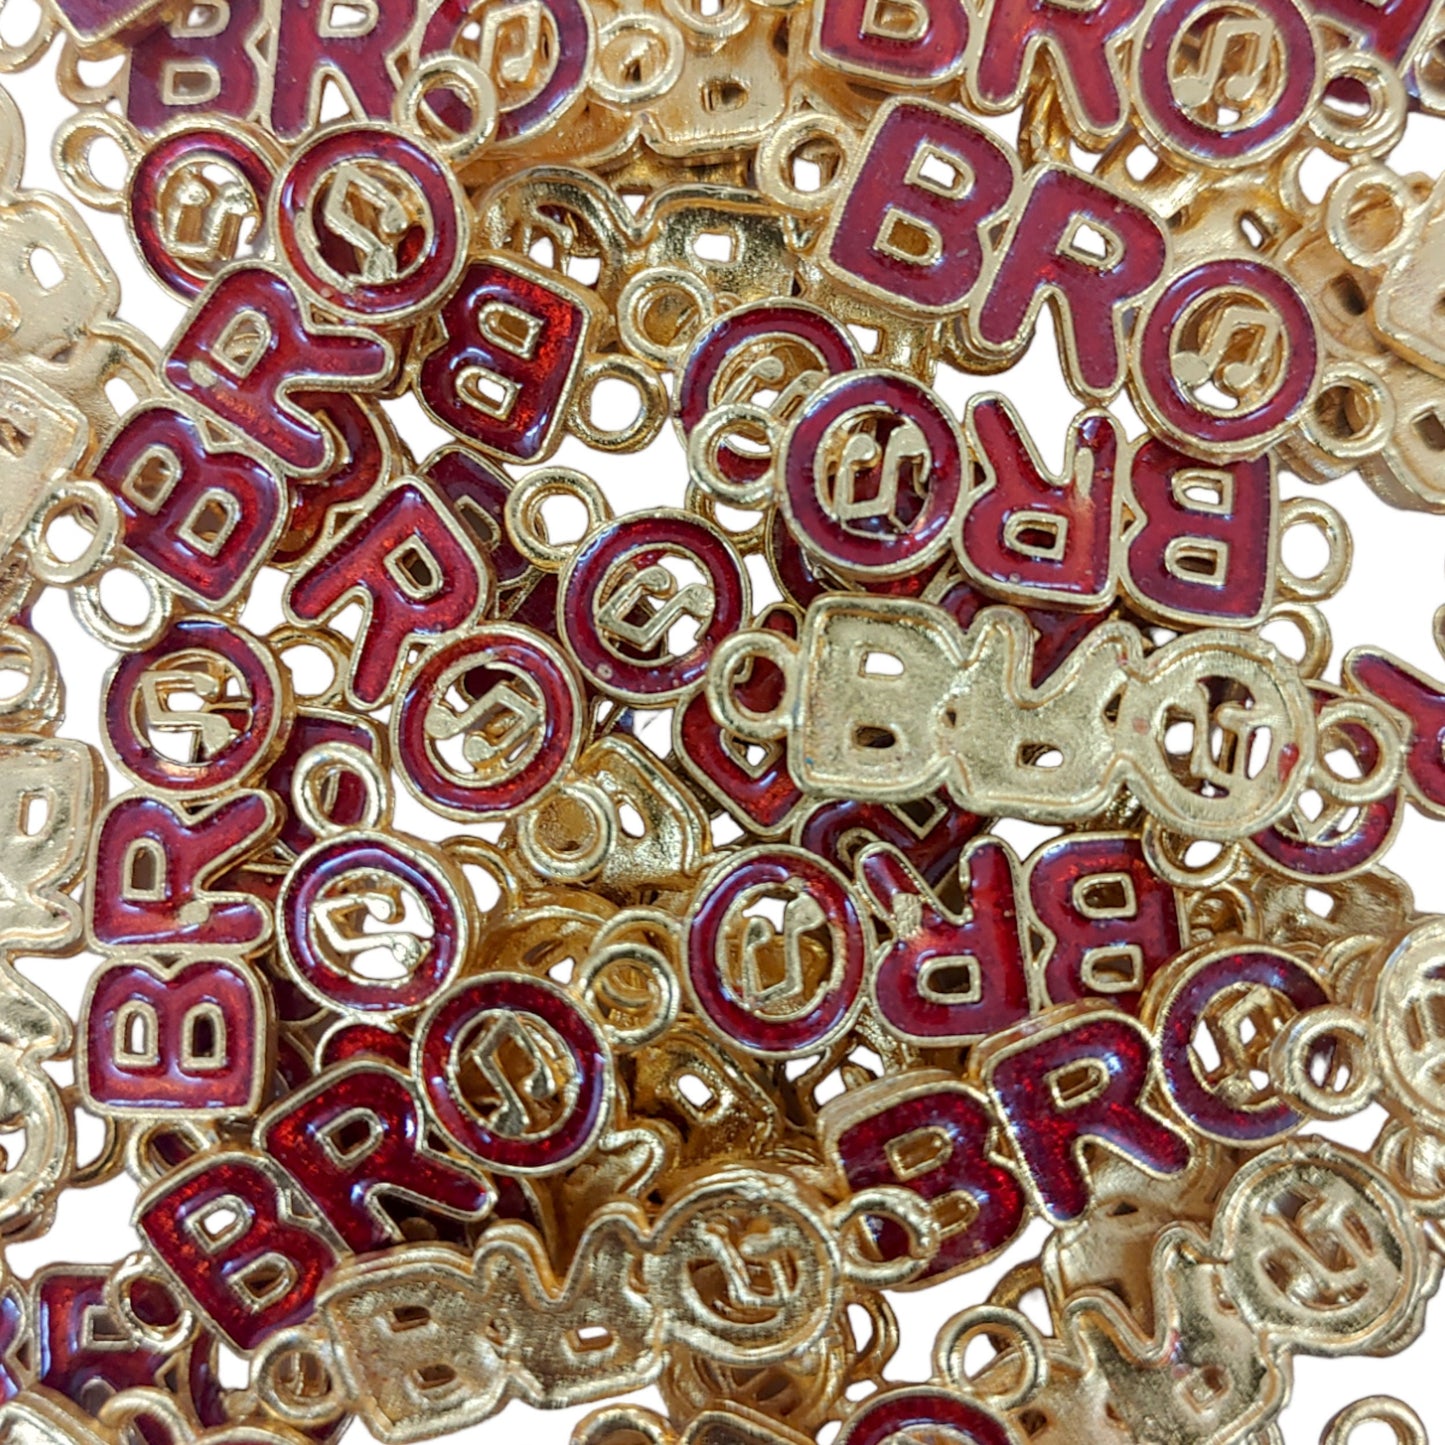 BRO Name Metal Die Cast Metal Motif  for Jewellery Making, Craft or Decor, Textile